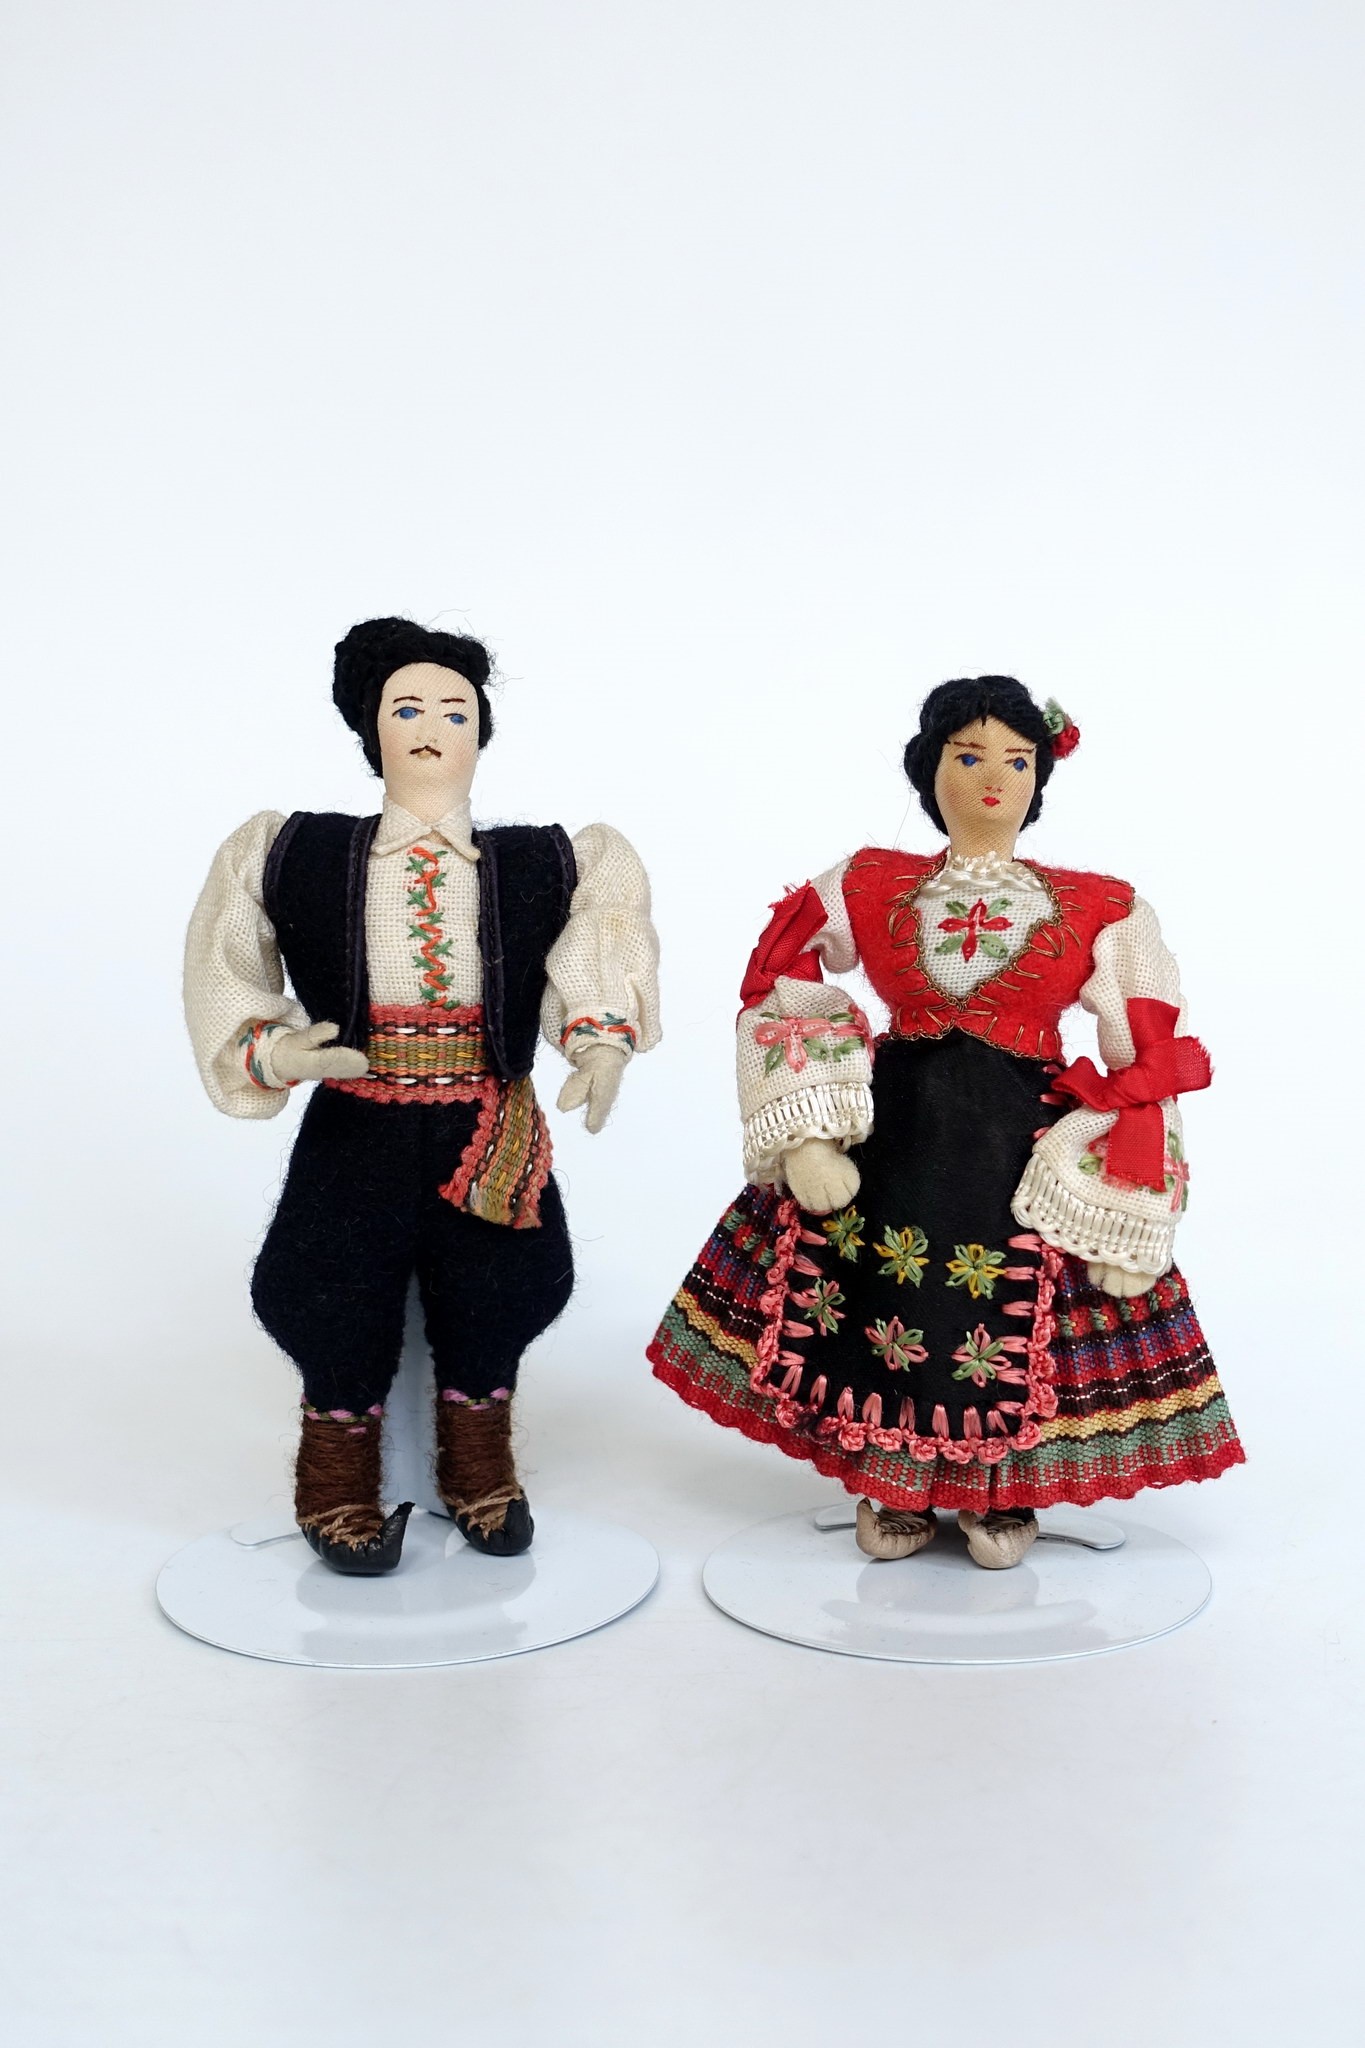 Serbia Dolls Sumadija | National costume dolls from all over the world